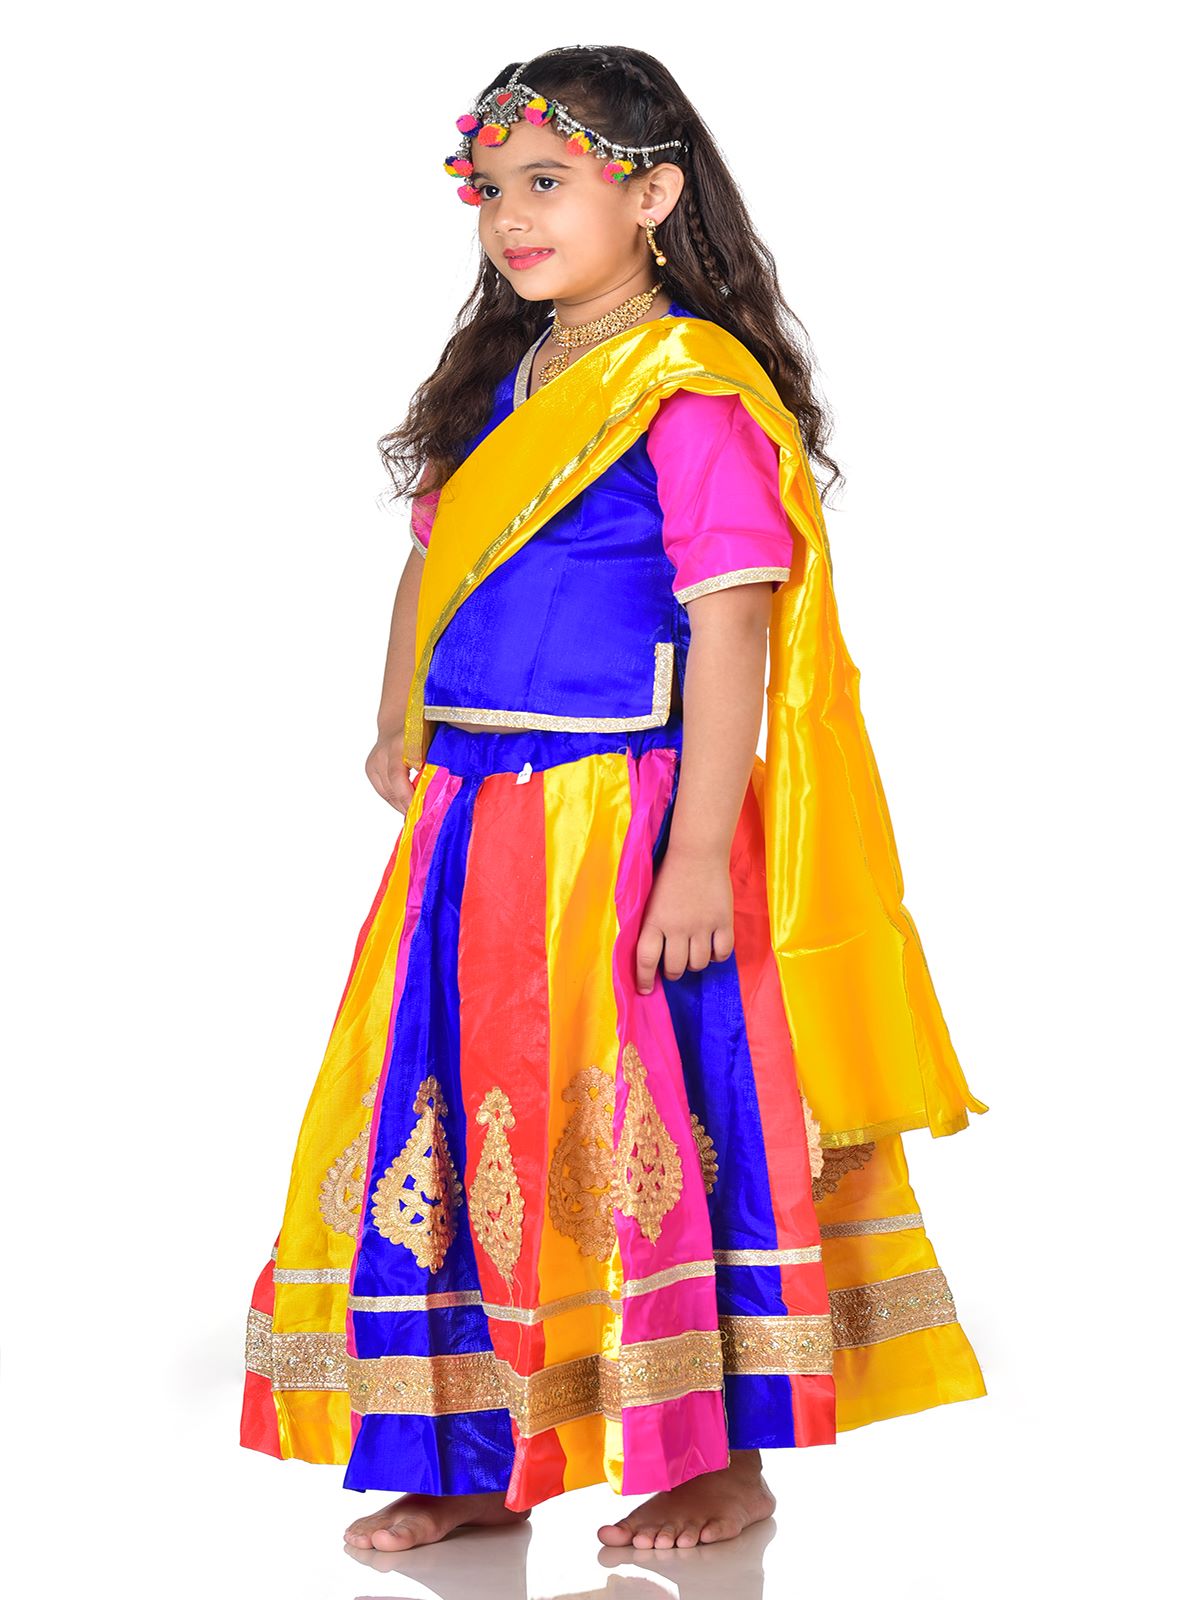 Your Little Girl Will Look Like A Princess In These Lehengas